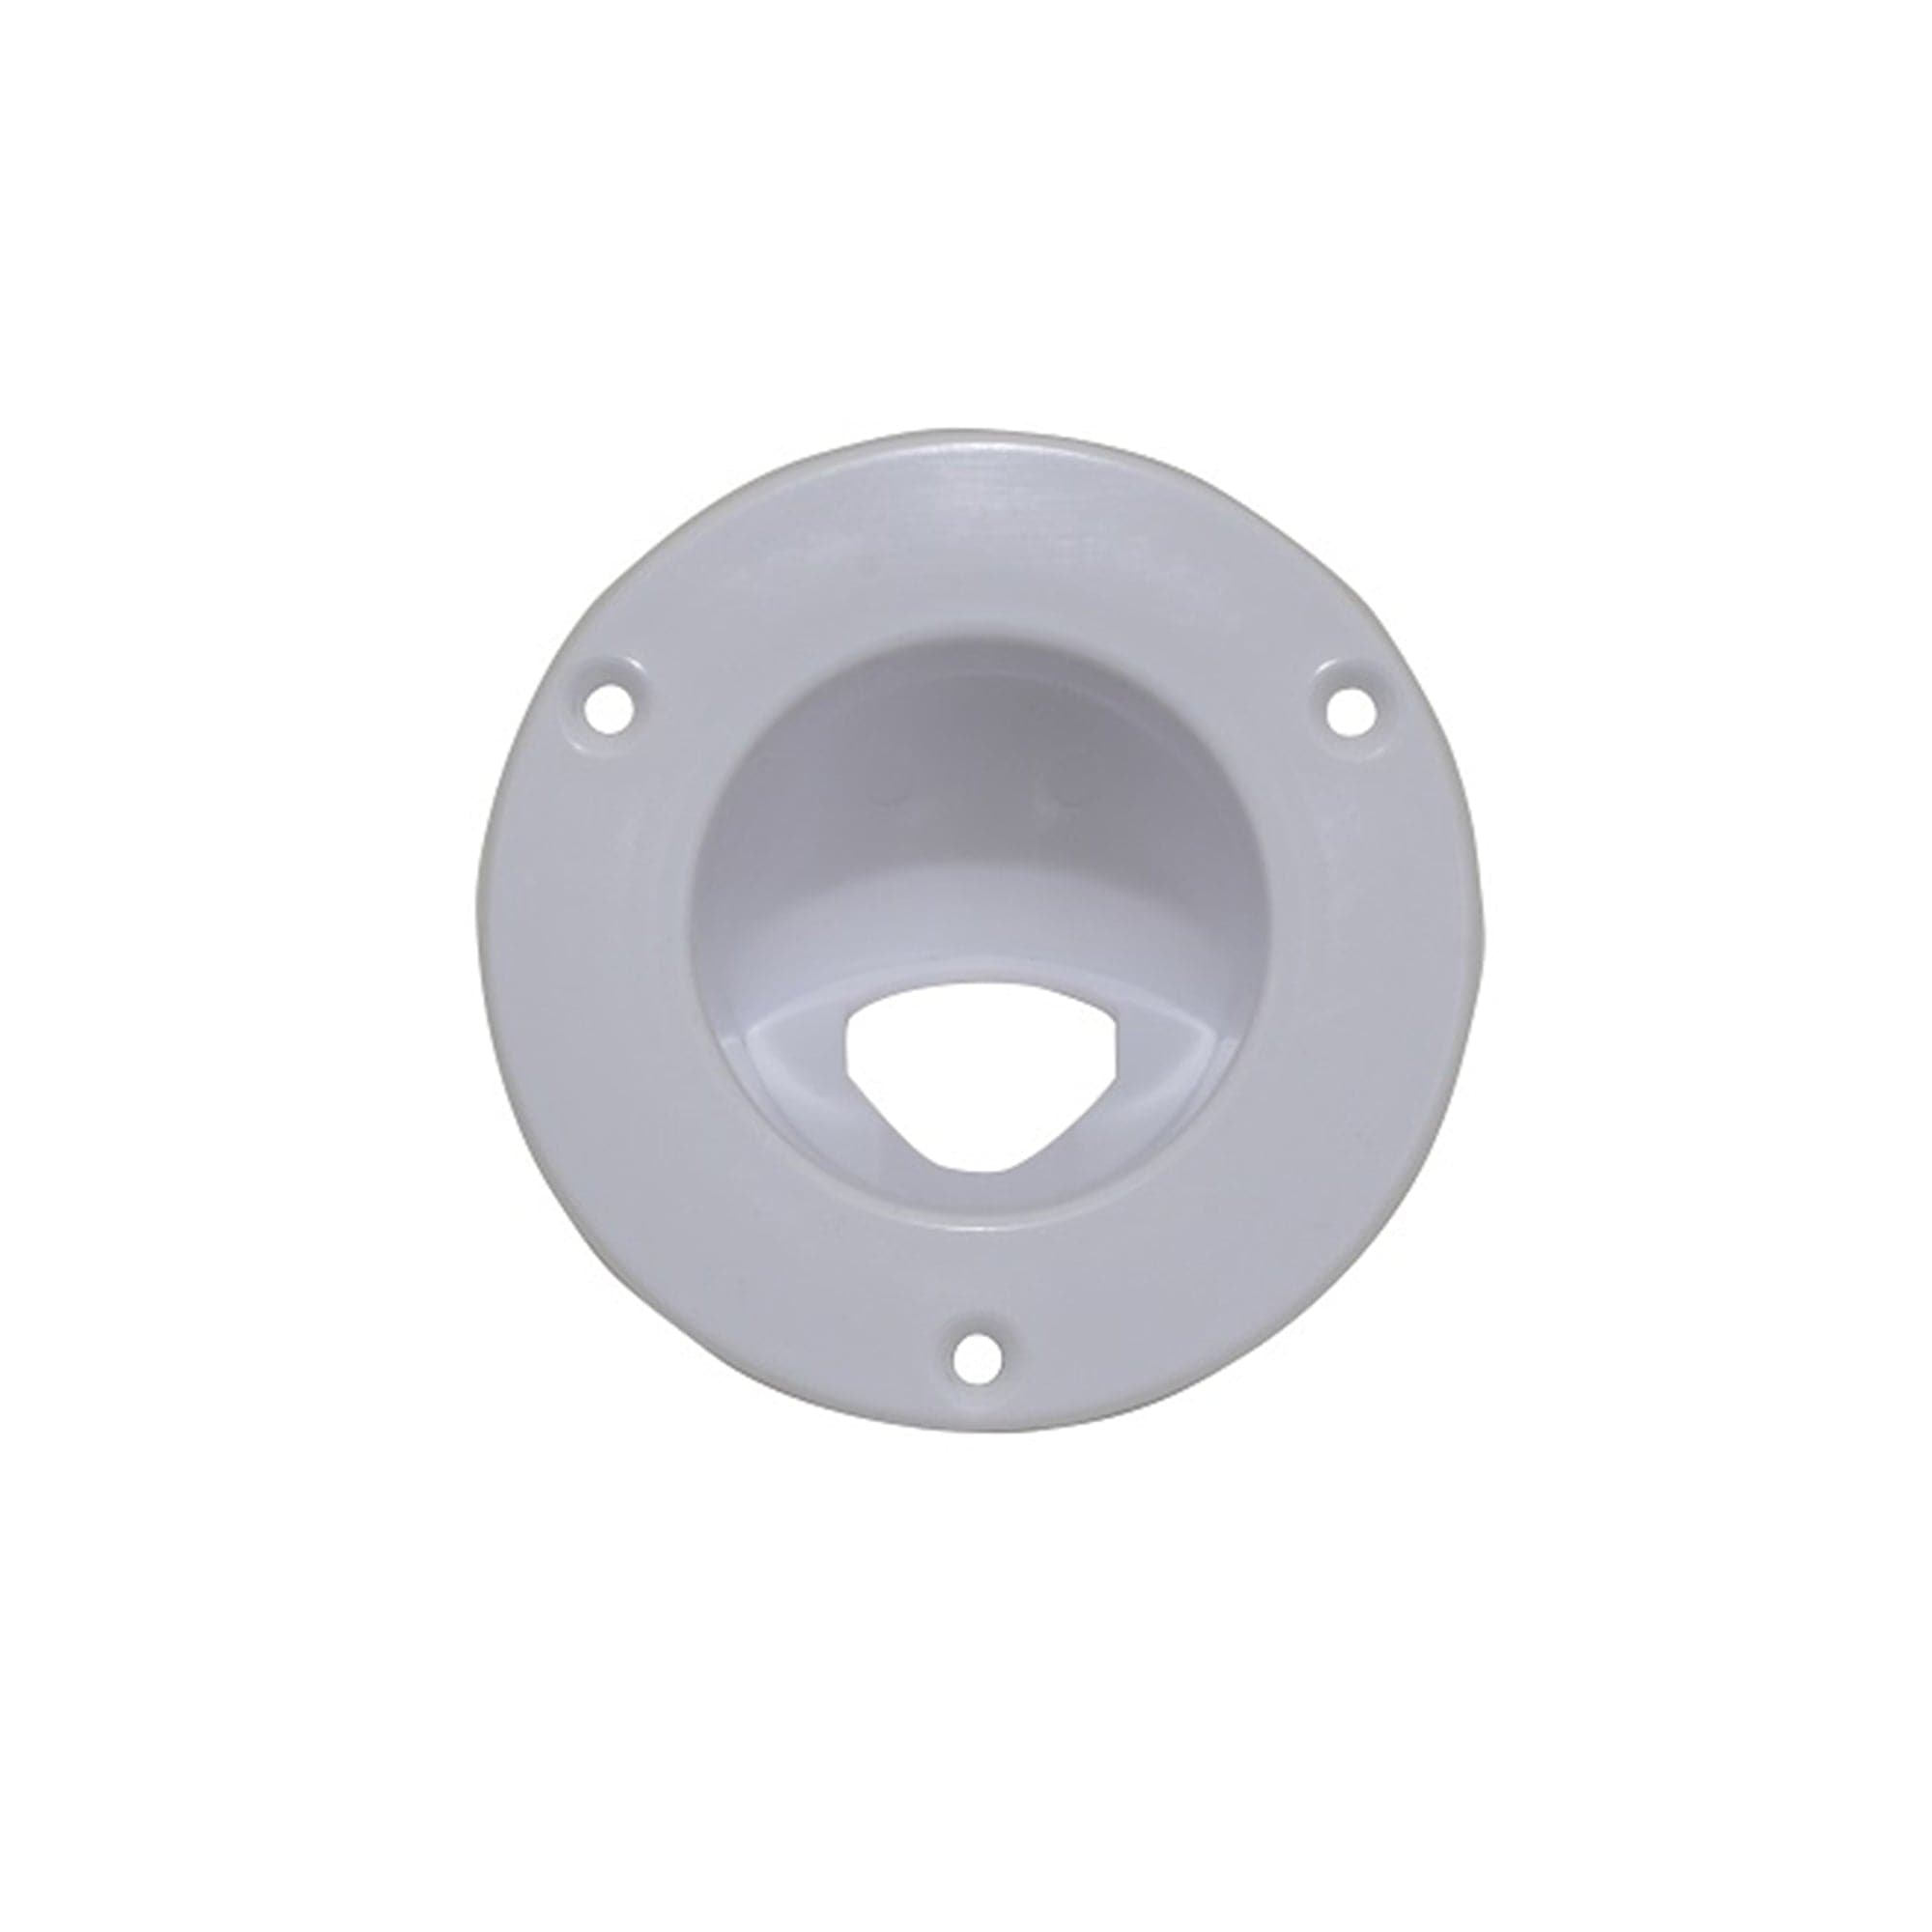 Scandvik 10031 White Cup Replacement for Vertical Recessed Showers